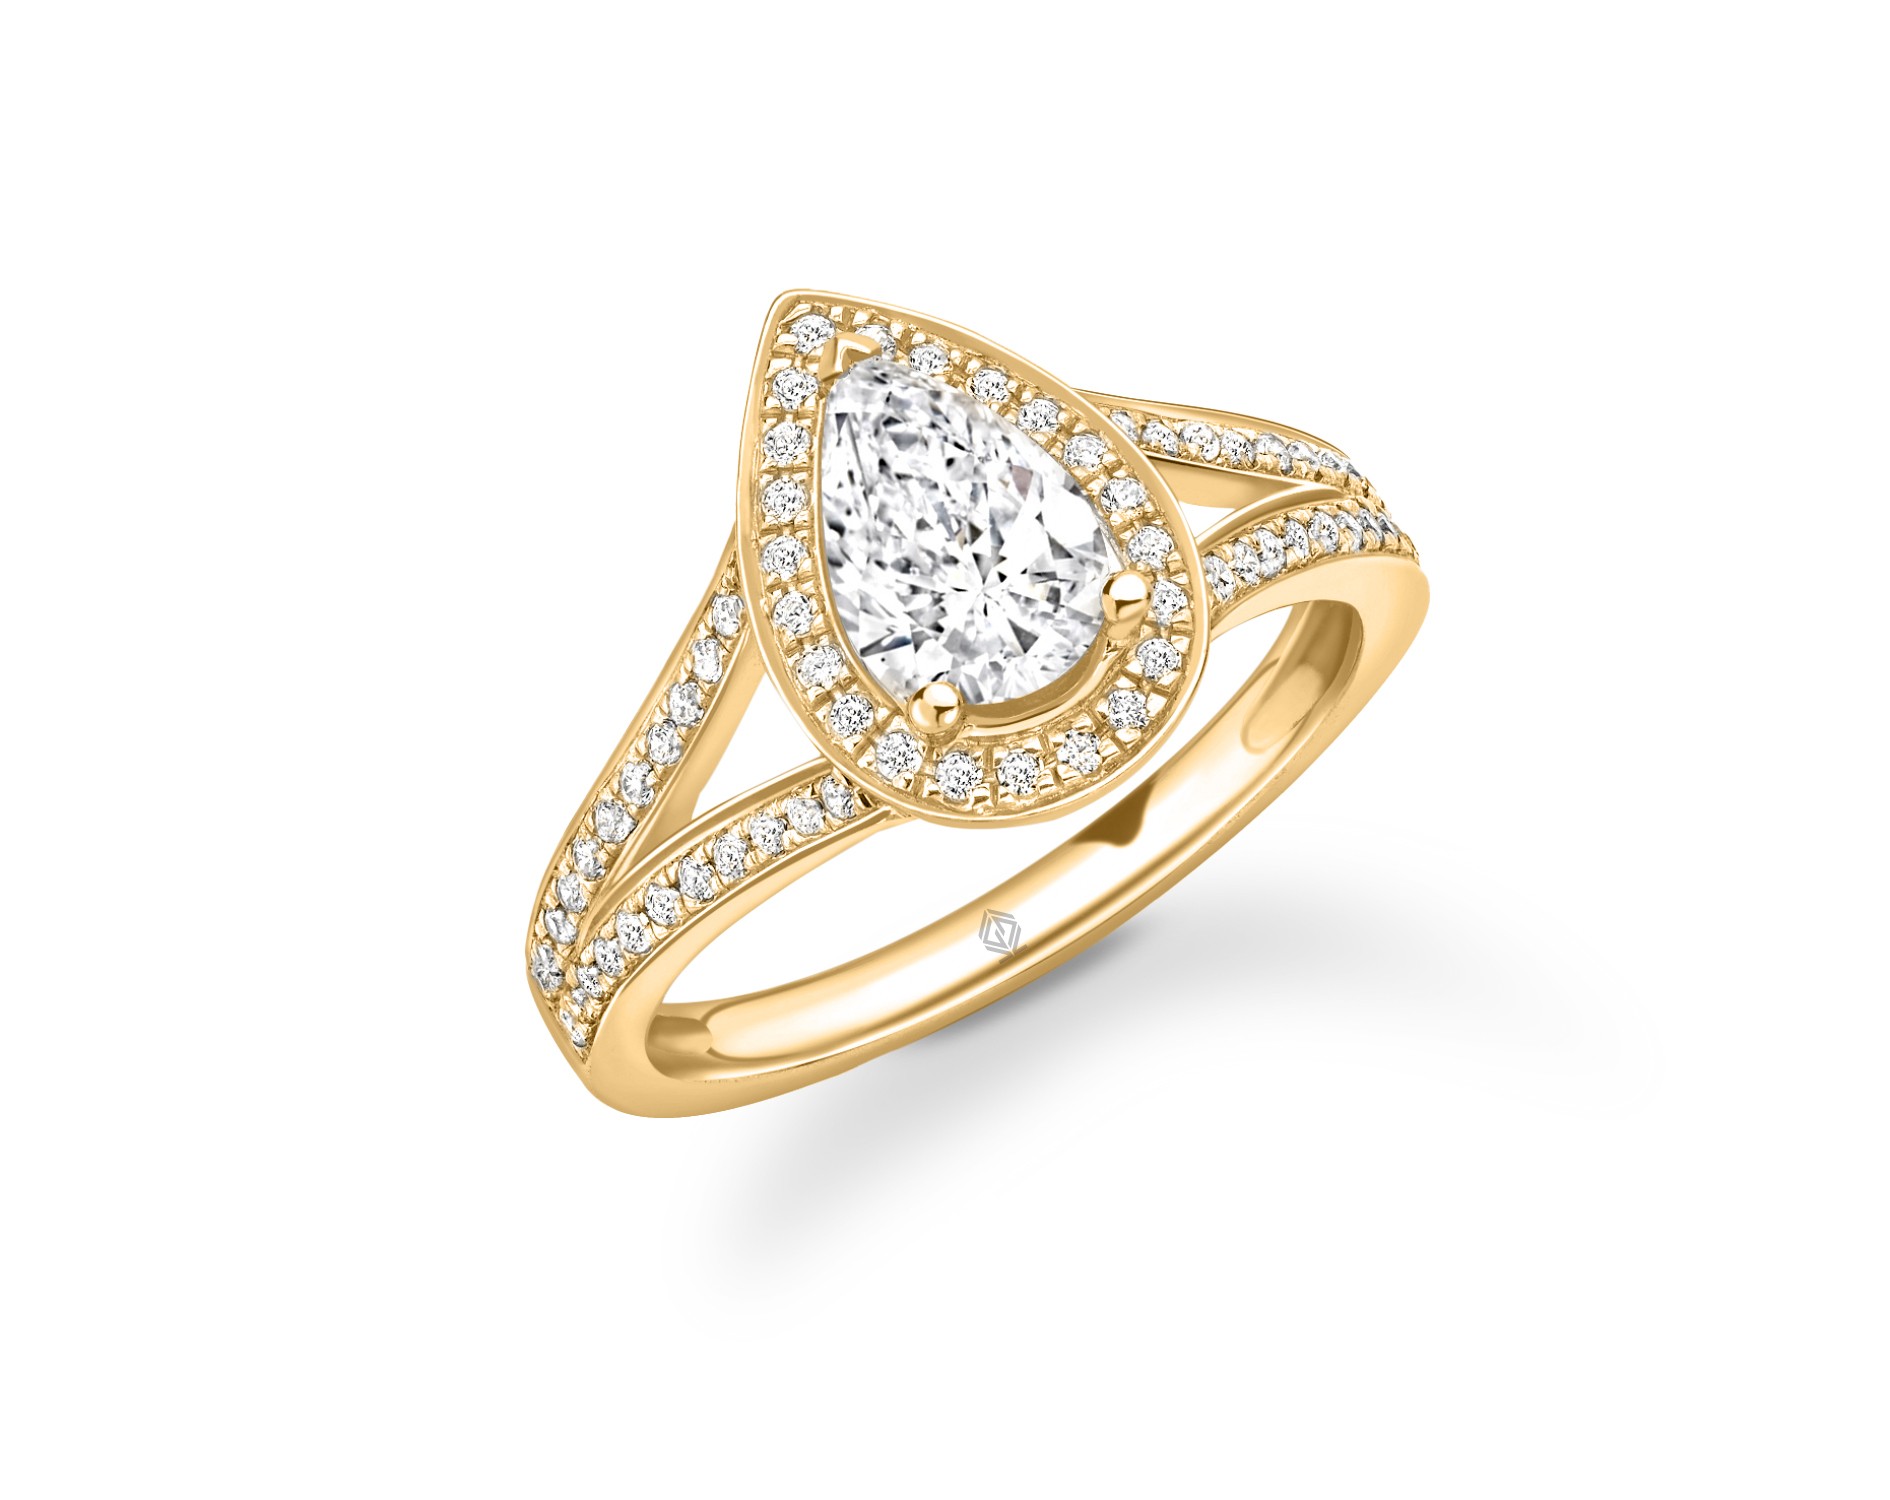 18K YELLOW GOLD HALO PEAR CUT DIAMOND ENGAGEMENT RING WITH SPLIT SHANK AND SIDE STONES